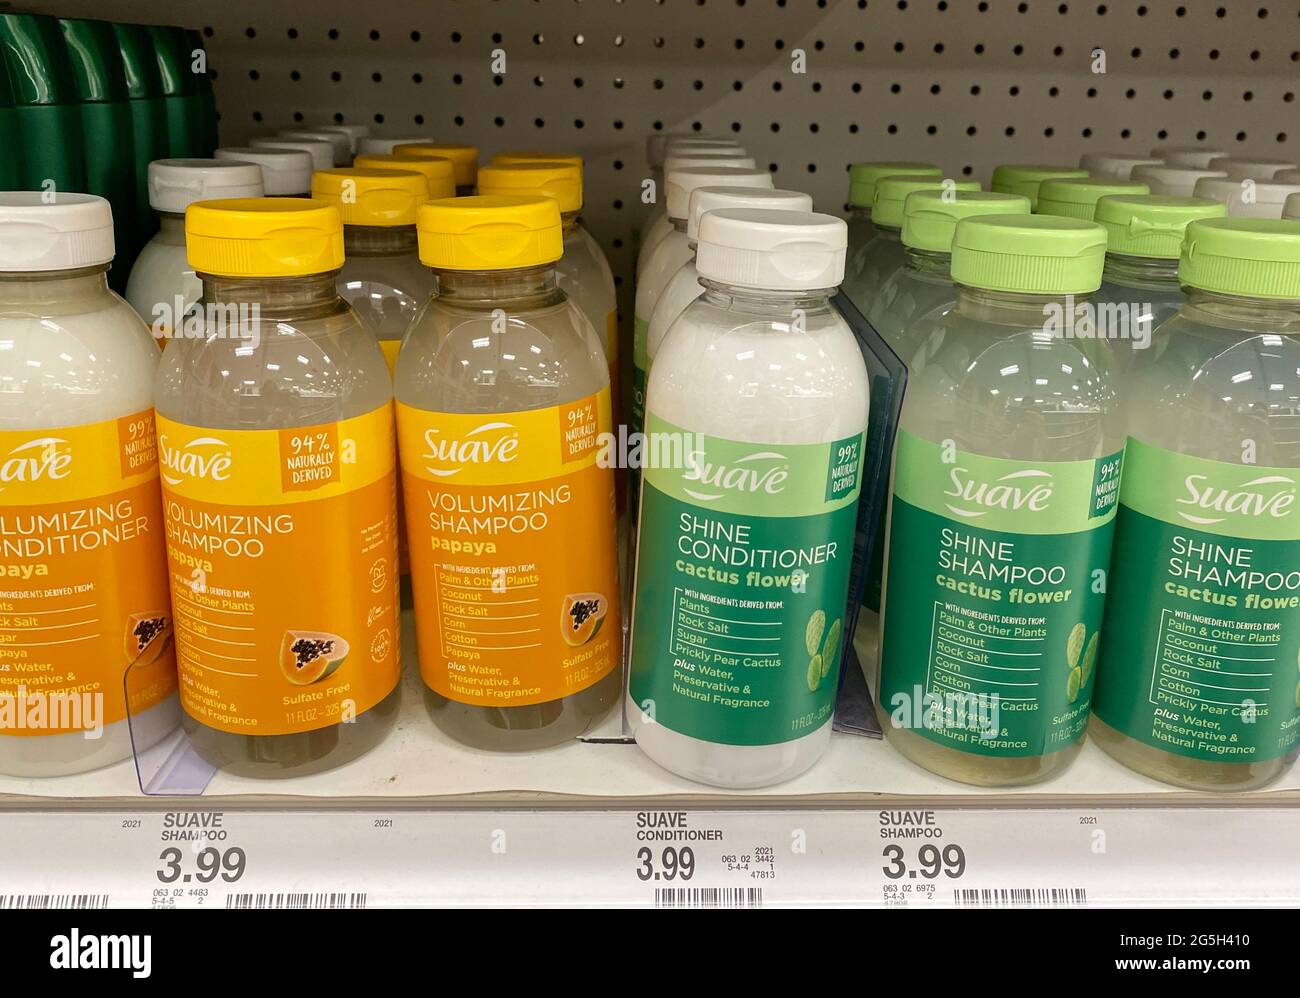 Suave Naturally-Derived Shampoo and Conditioner on shelf at a Target store in suburban Chicago. Stock Photo